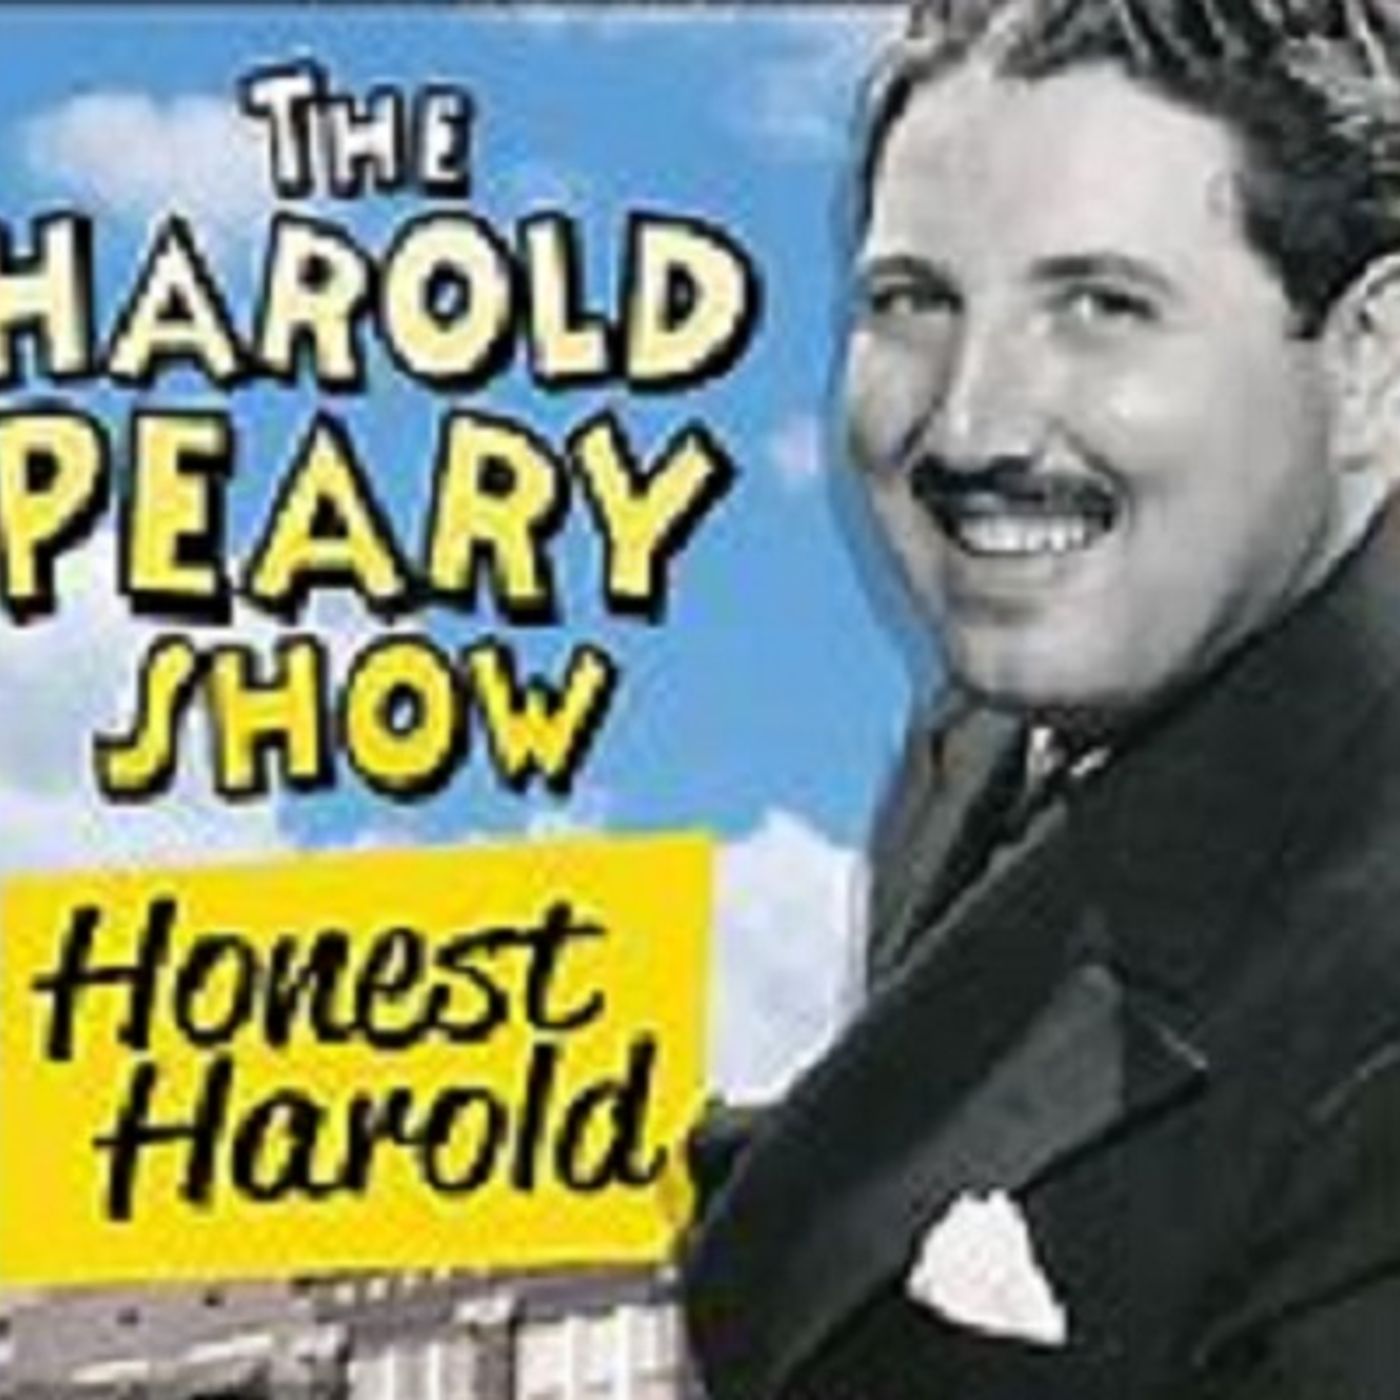 Harold Peary 50-08-23 Audition Show